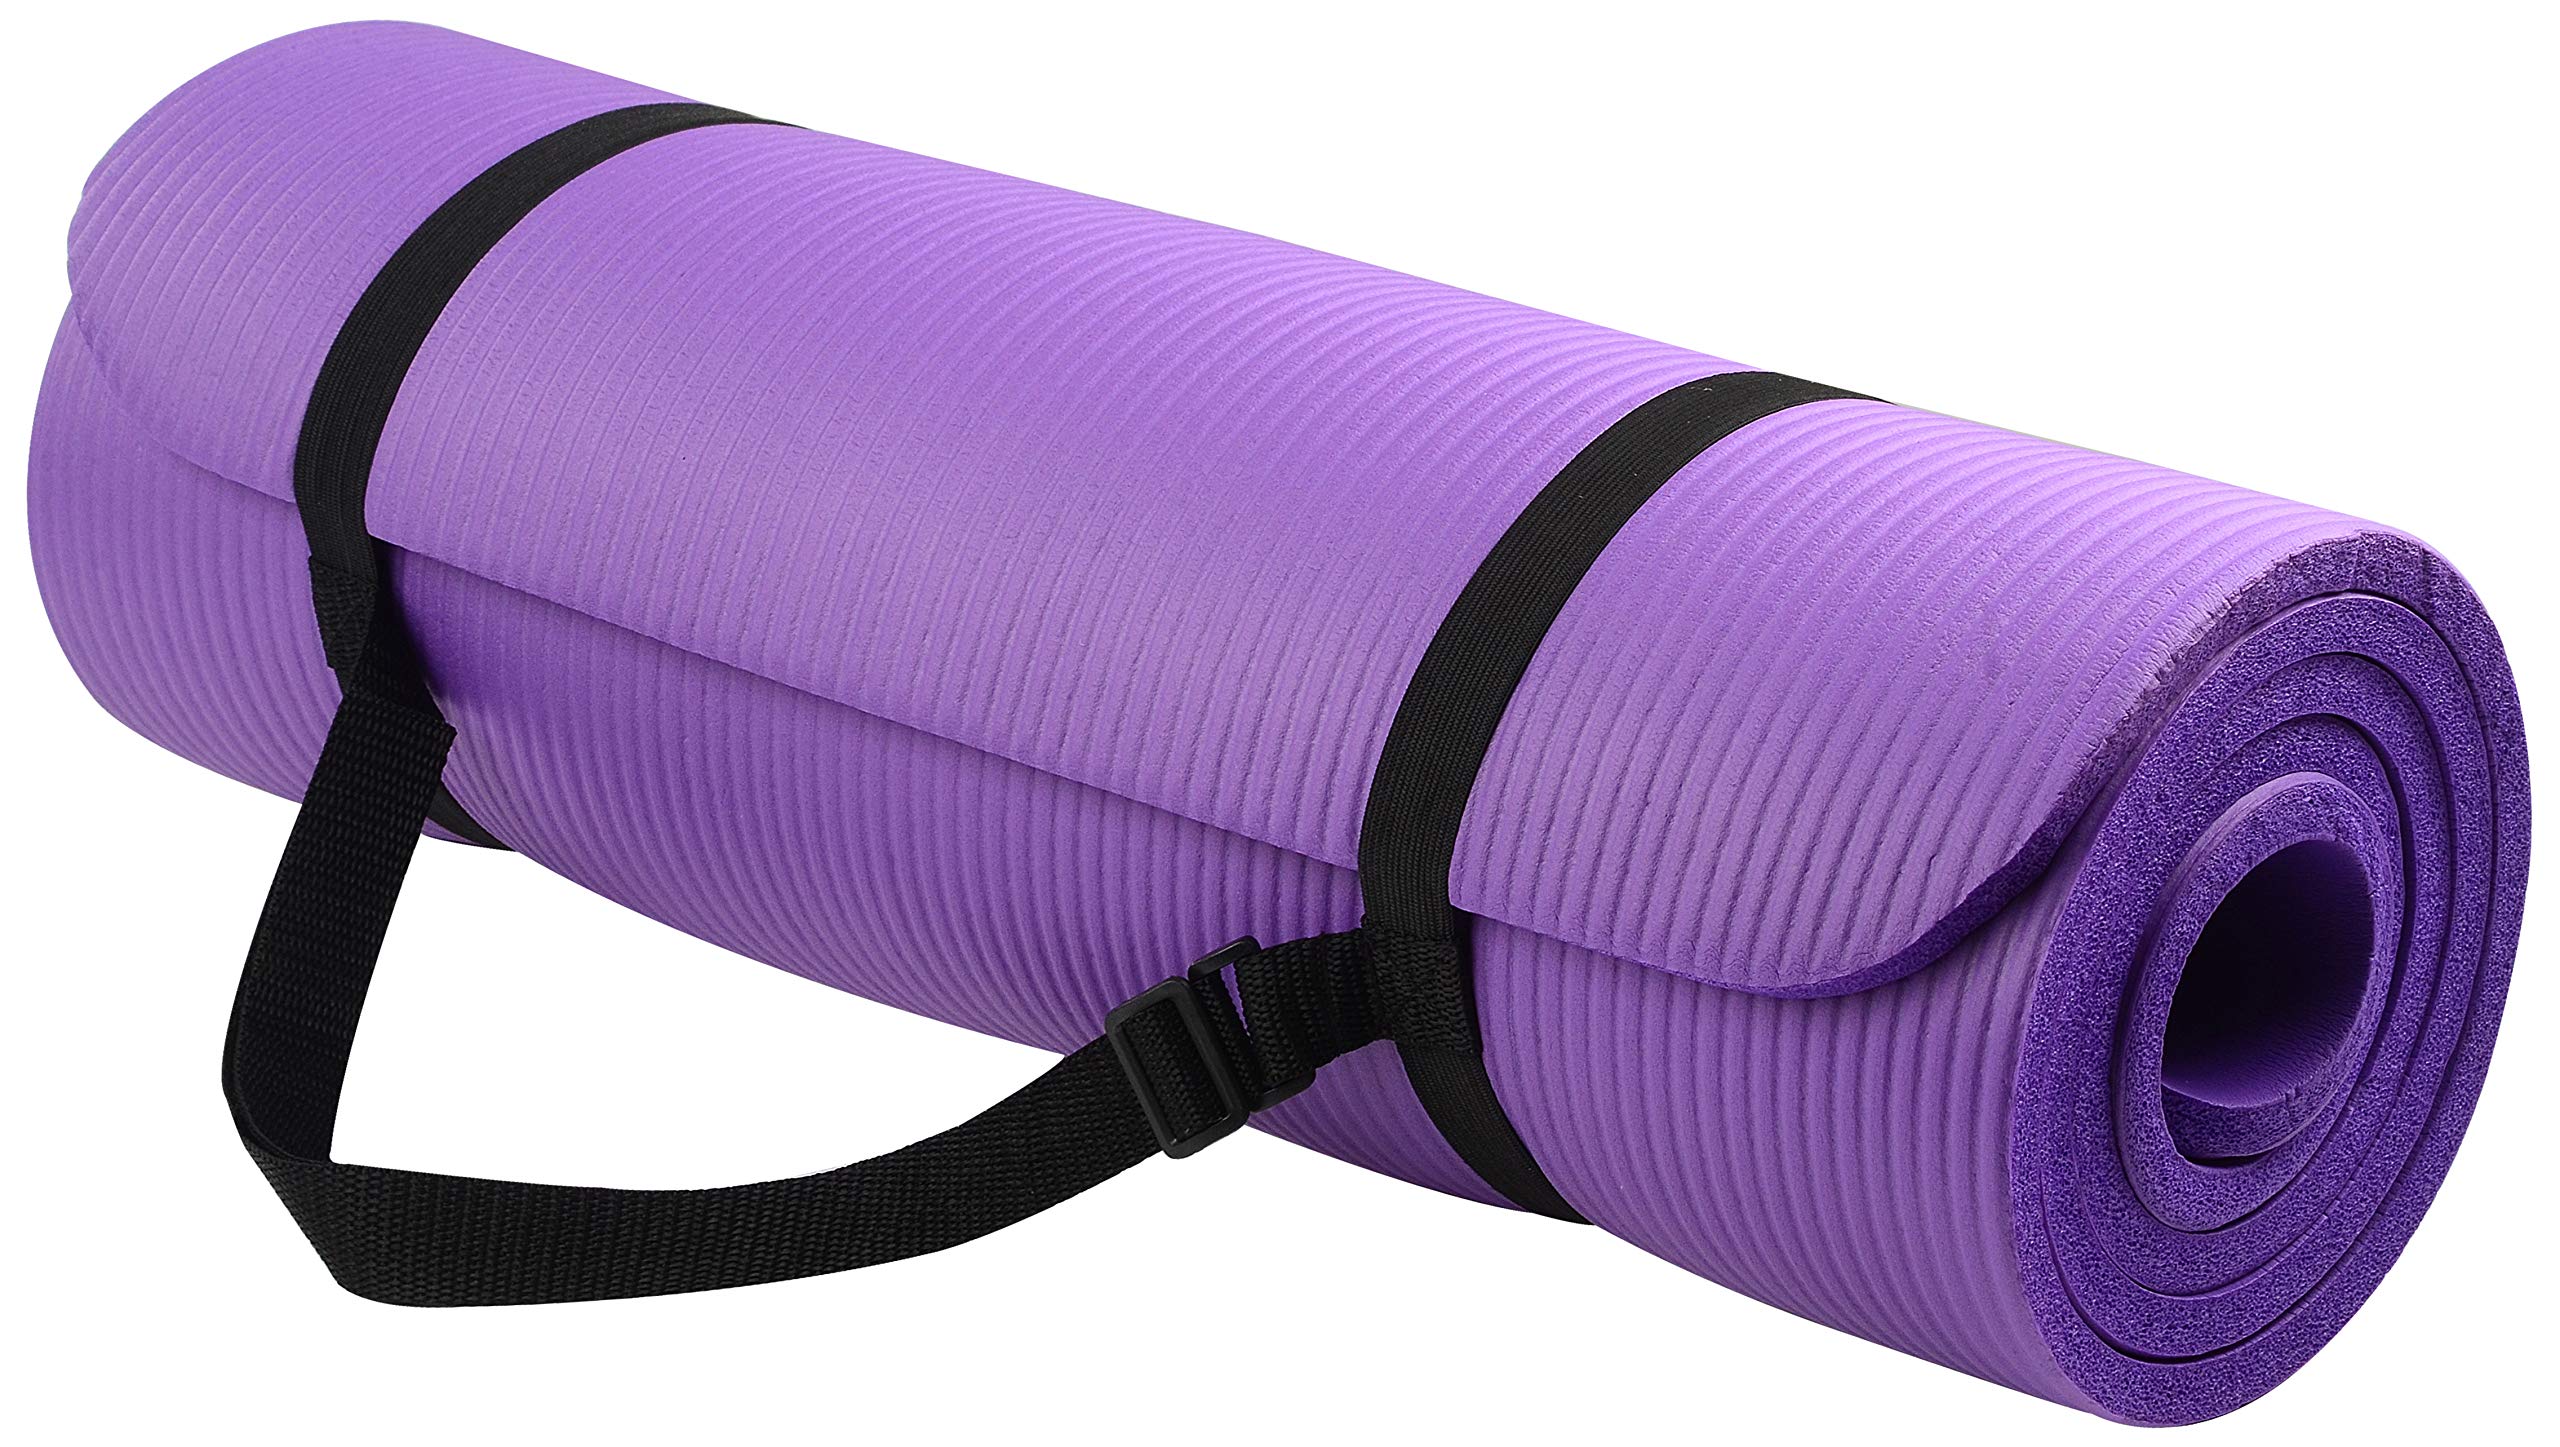  BalanceFrom All Purpose 1/2-Inch Extra Thick High Density  Anti-Tear Exercise Yoga Mat